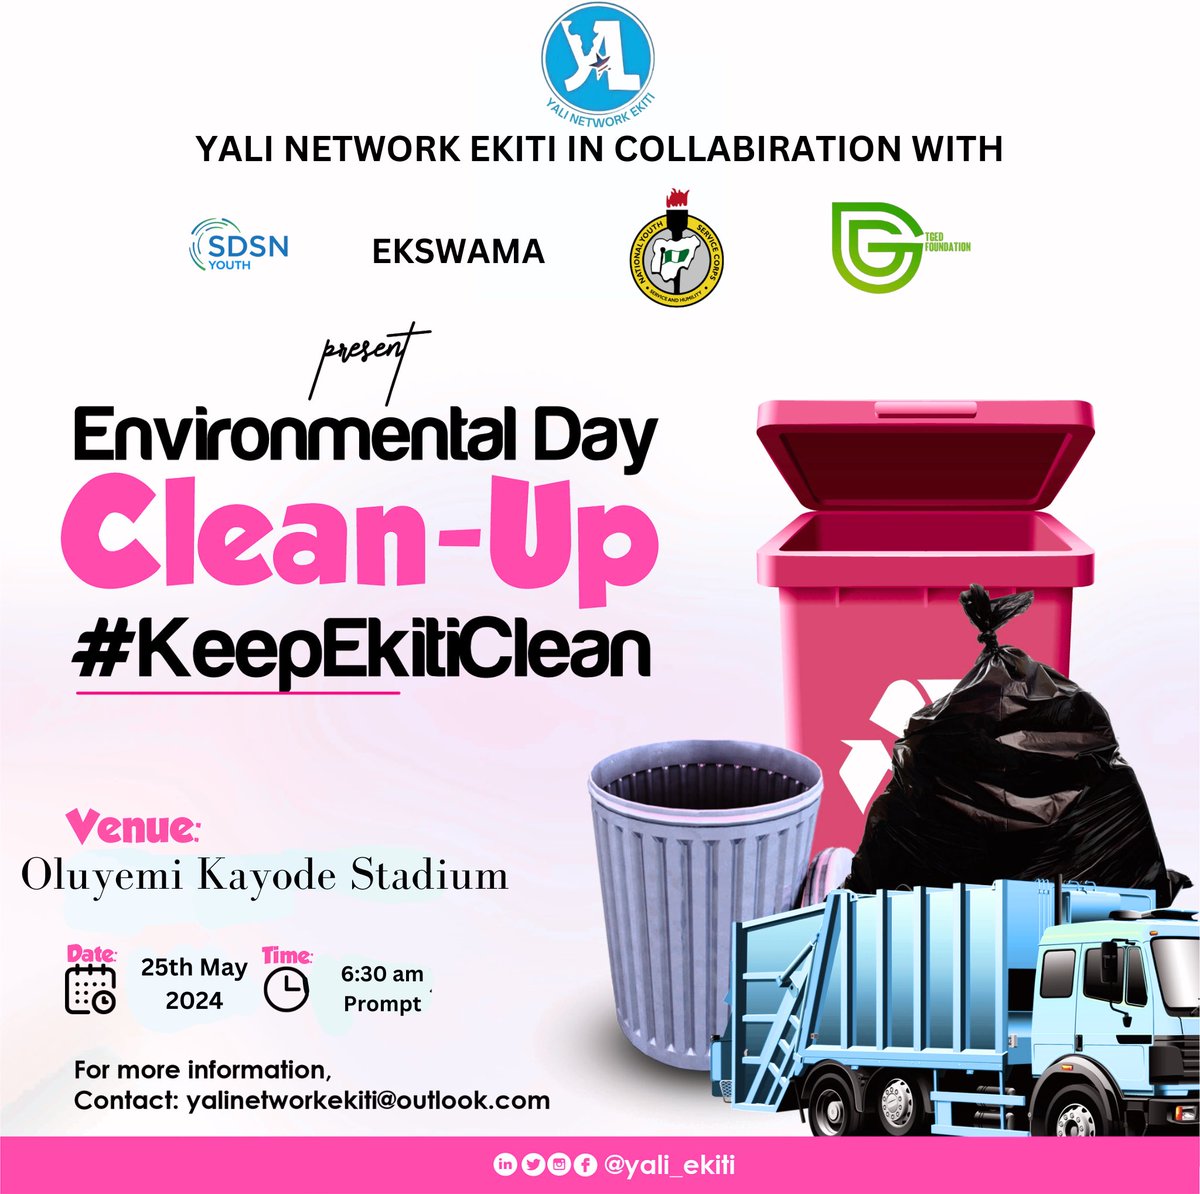 Join YALI Ekiti in the upcoming community cleaning exercise! By Working together, we can make a positive impact in our environment and create a cleaner community for all. Let’s Clean To Impact!💙 Venue :OLUYEMI KAYODE STADIUM Date. : Sat, 25th May 2024 Time. : 6:30AM